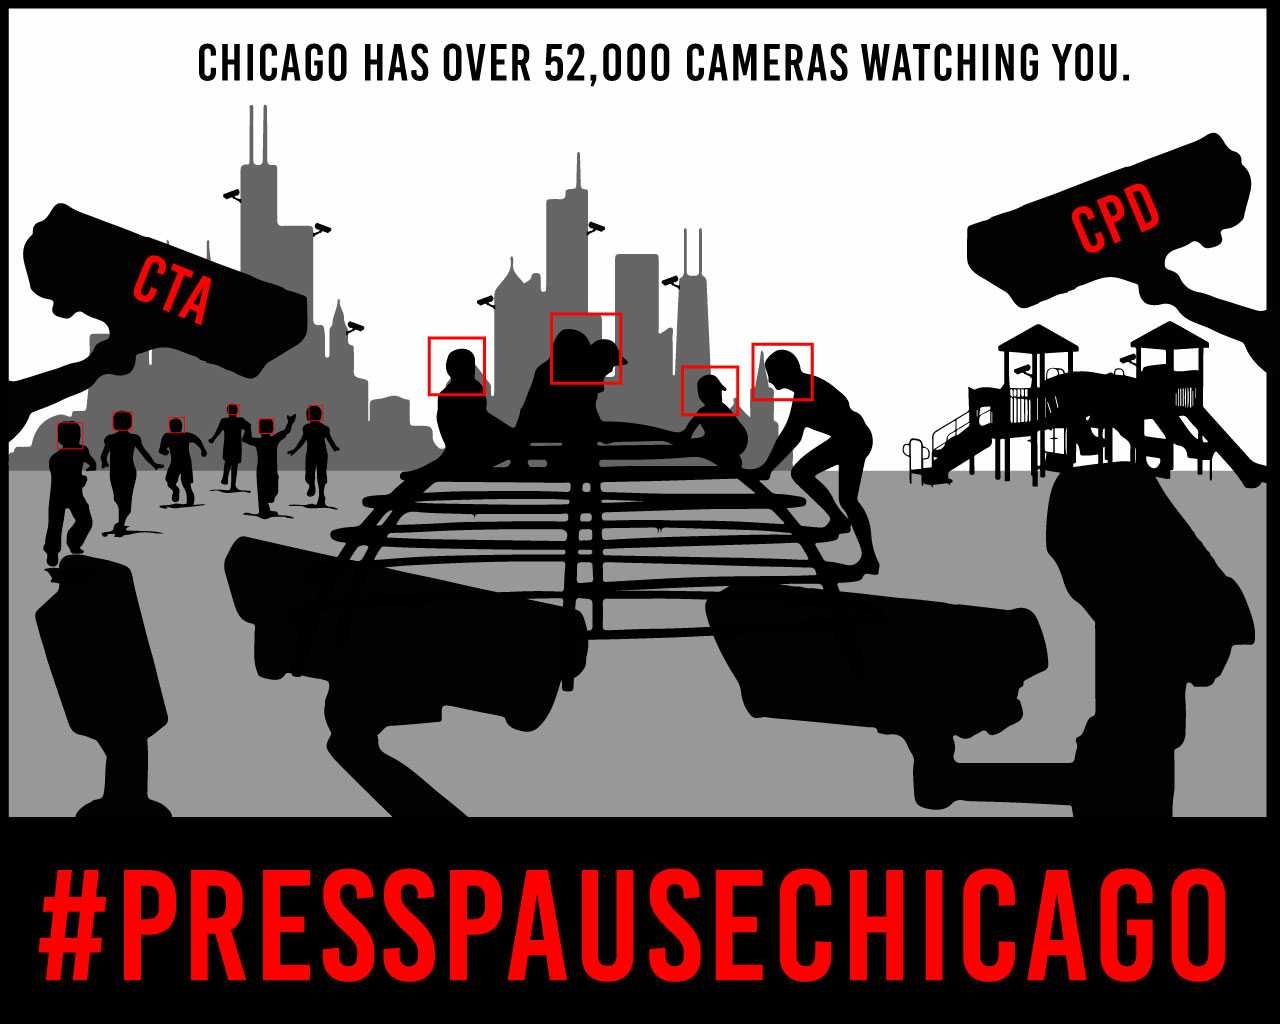 Chicago has over 52,000 cameras watching you.